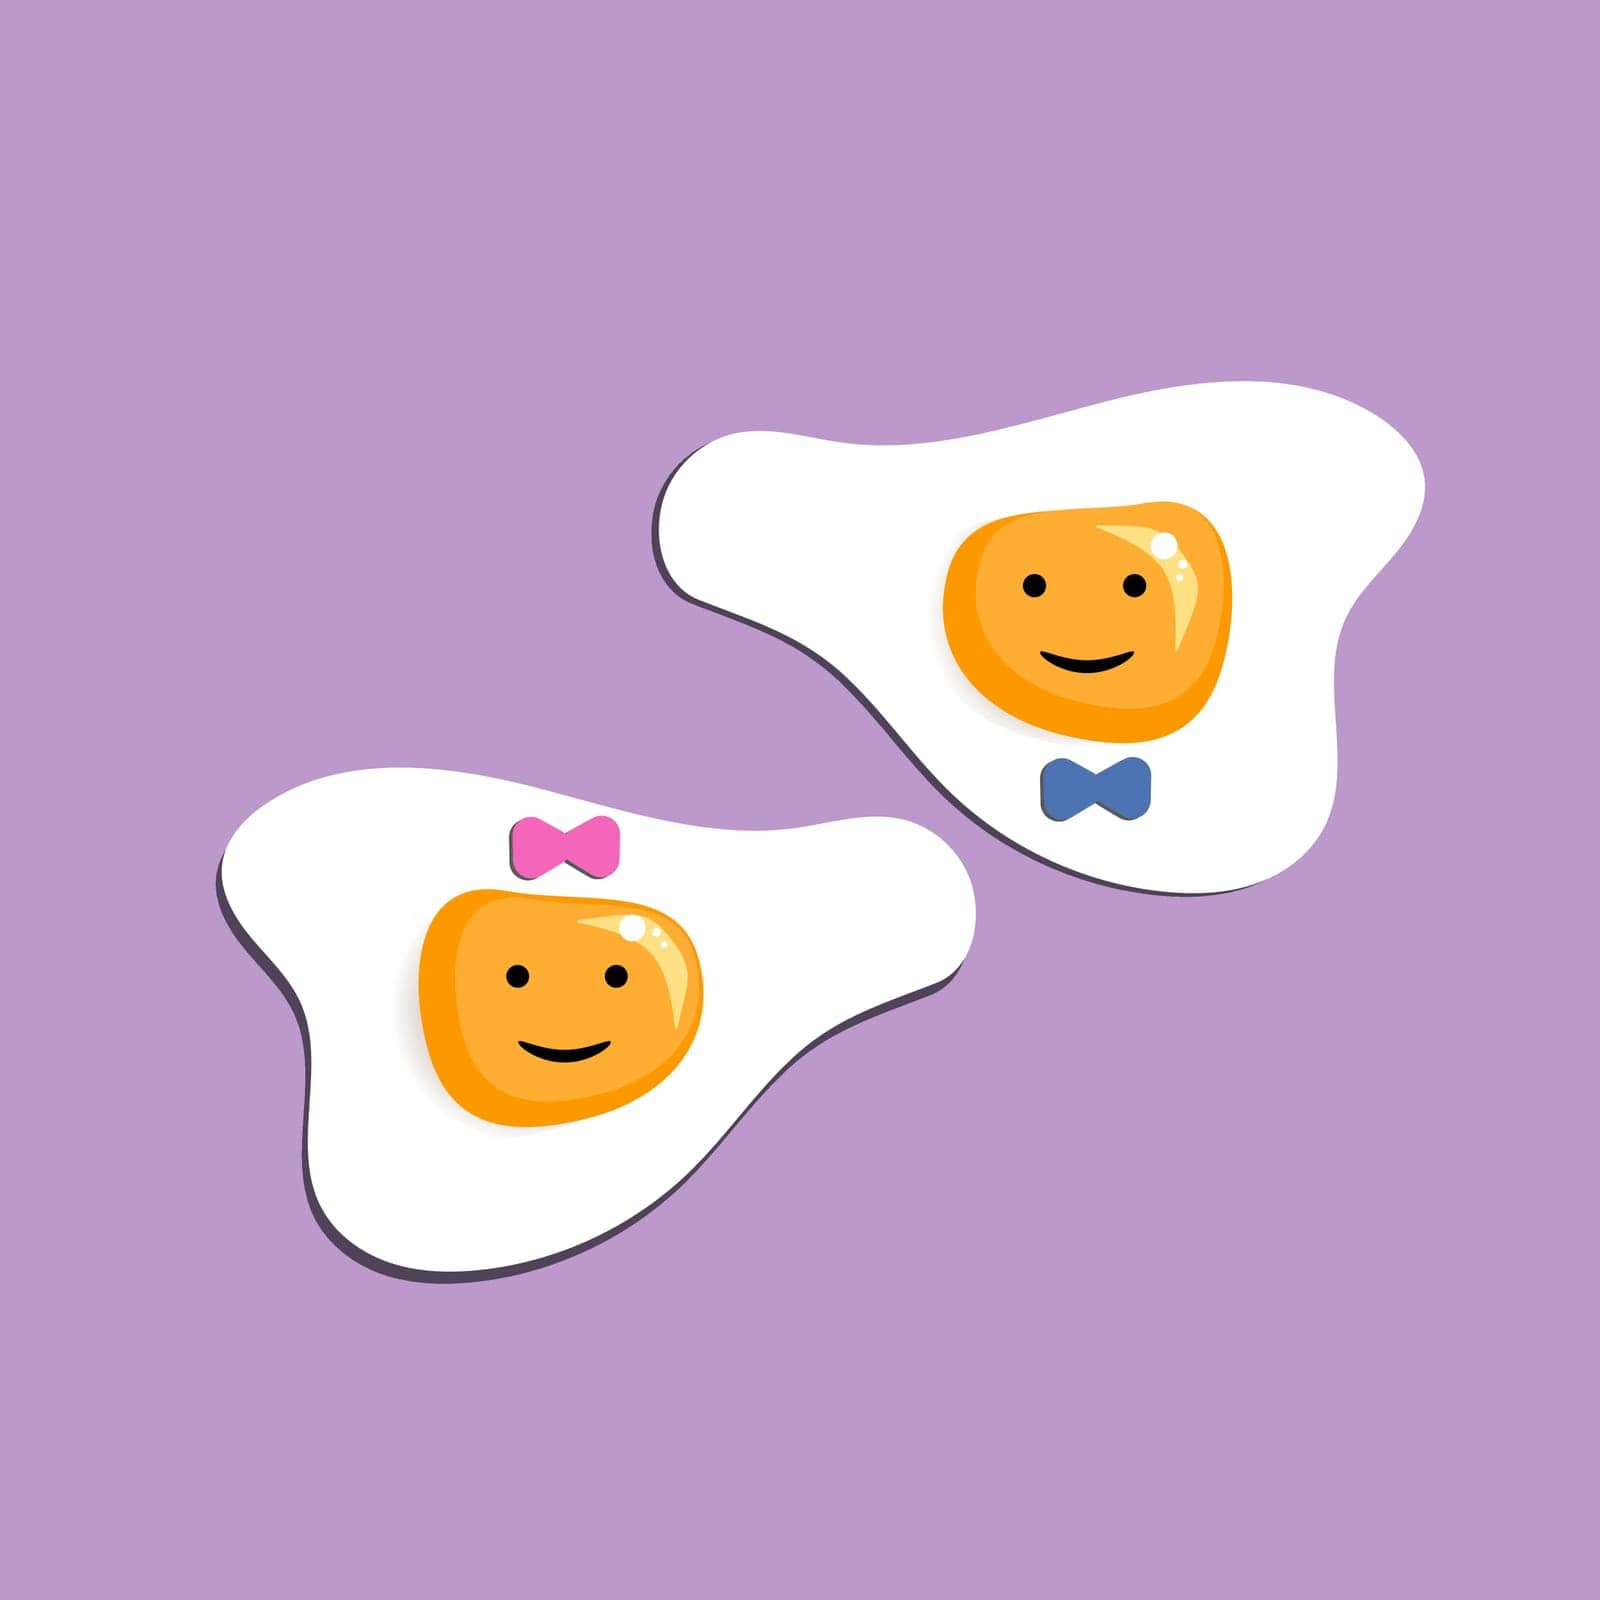 Funny cute fried eggs emoticon face icon like a boy and girl with a bow tie and bow isolated on the purple background. Paper cut-out vector illustration